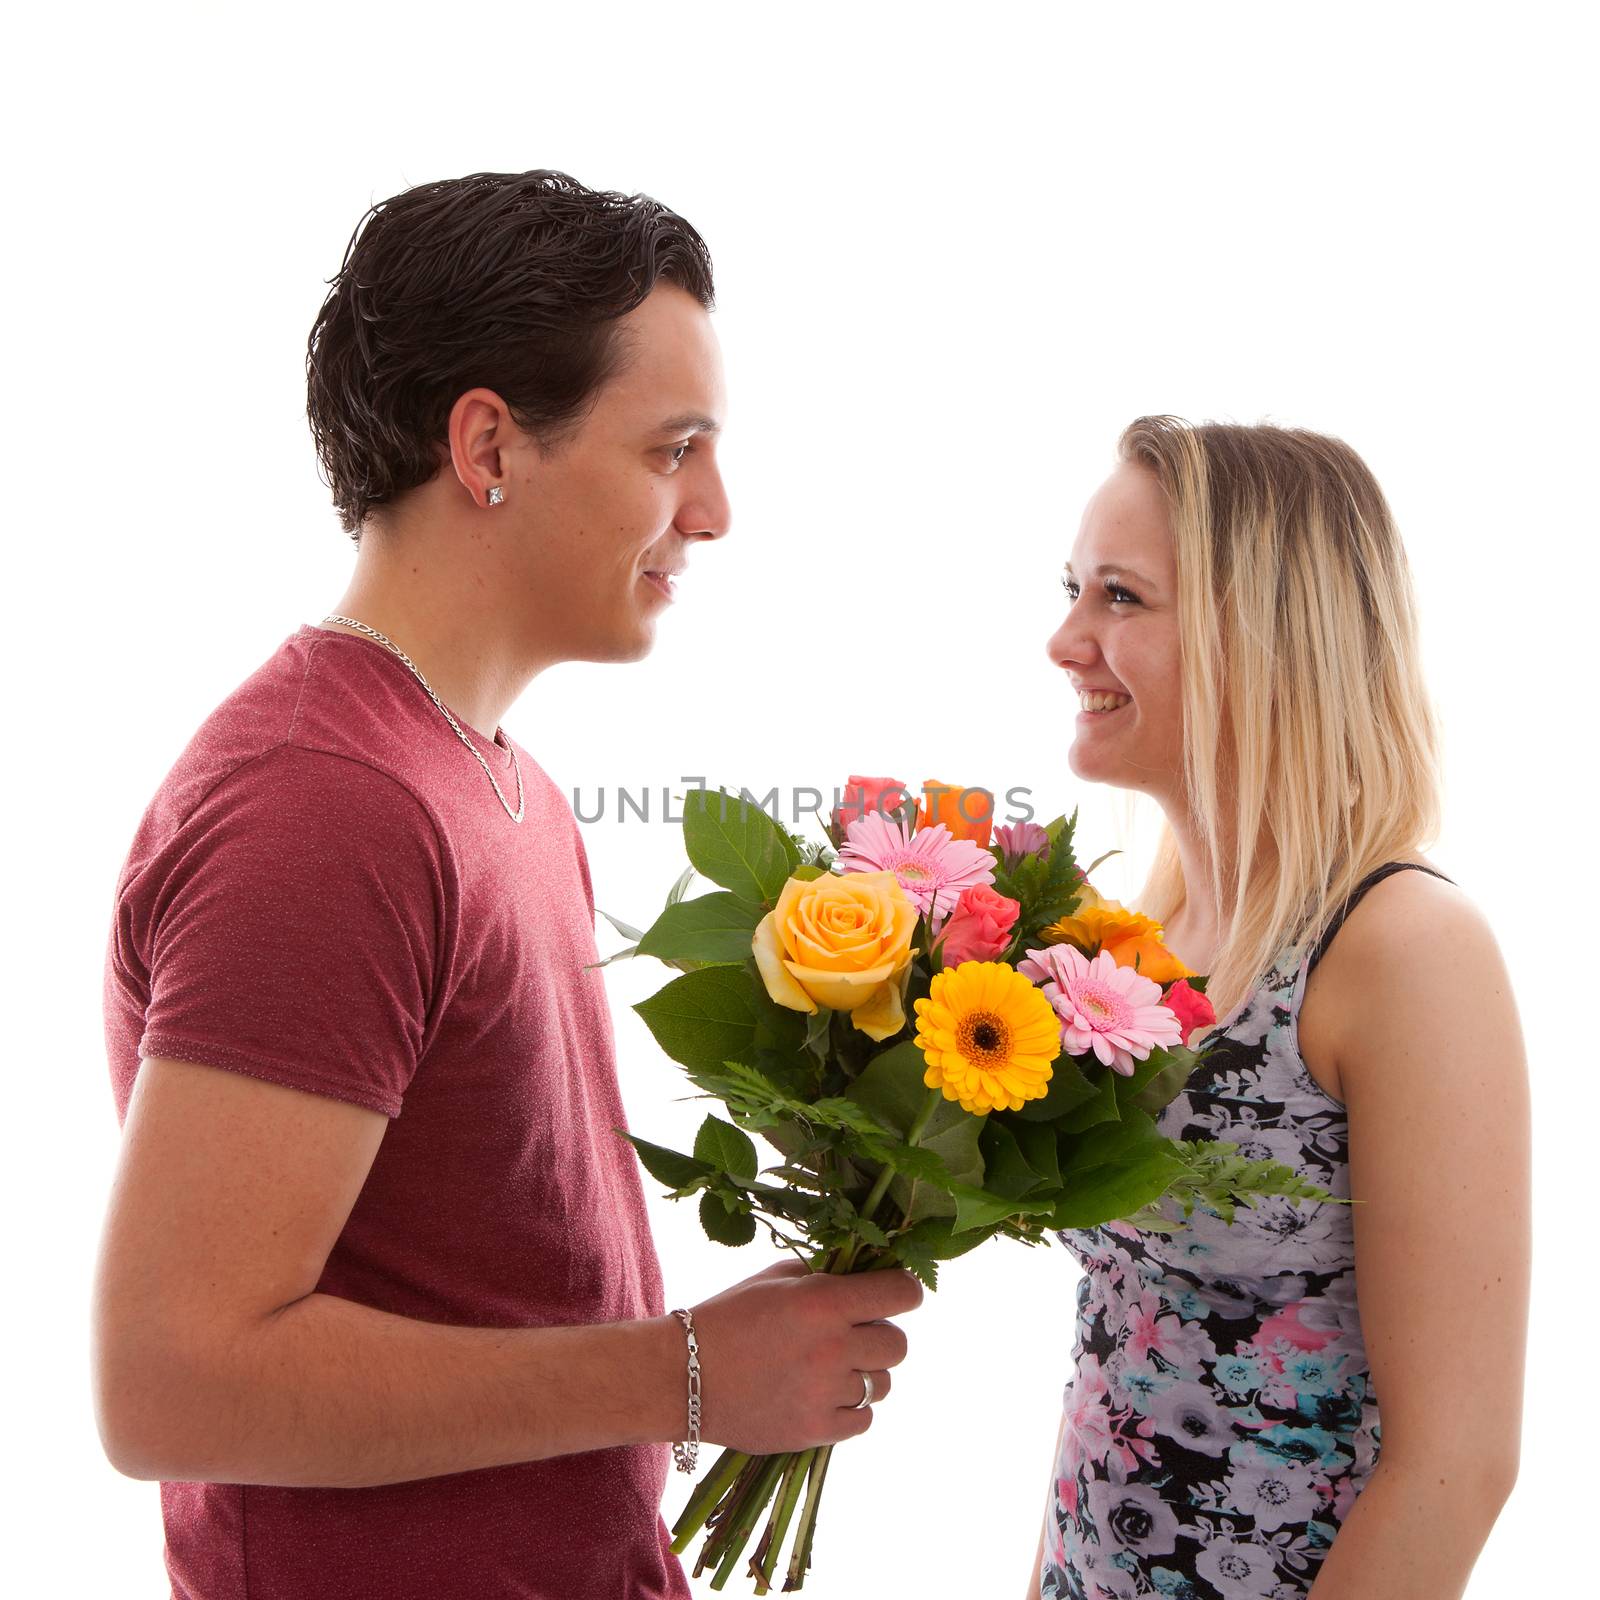 Boy is giving flowers to his girlfriend over white background